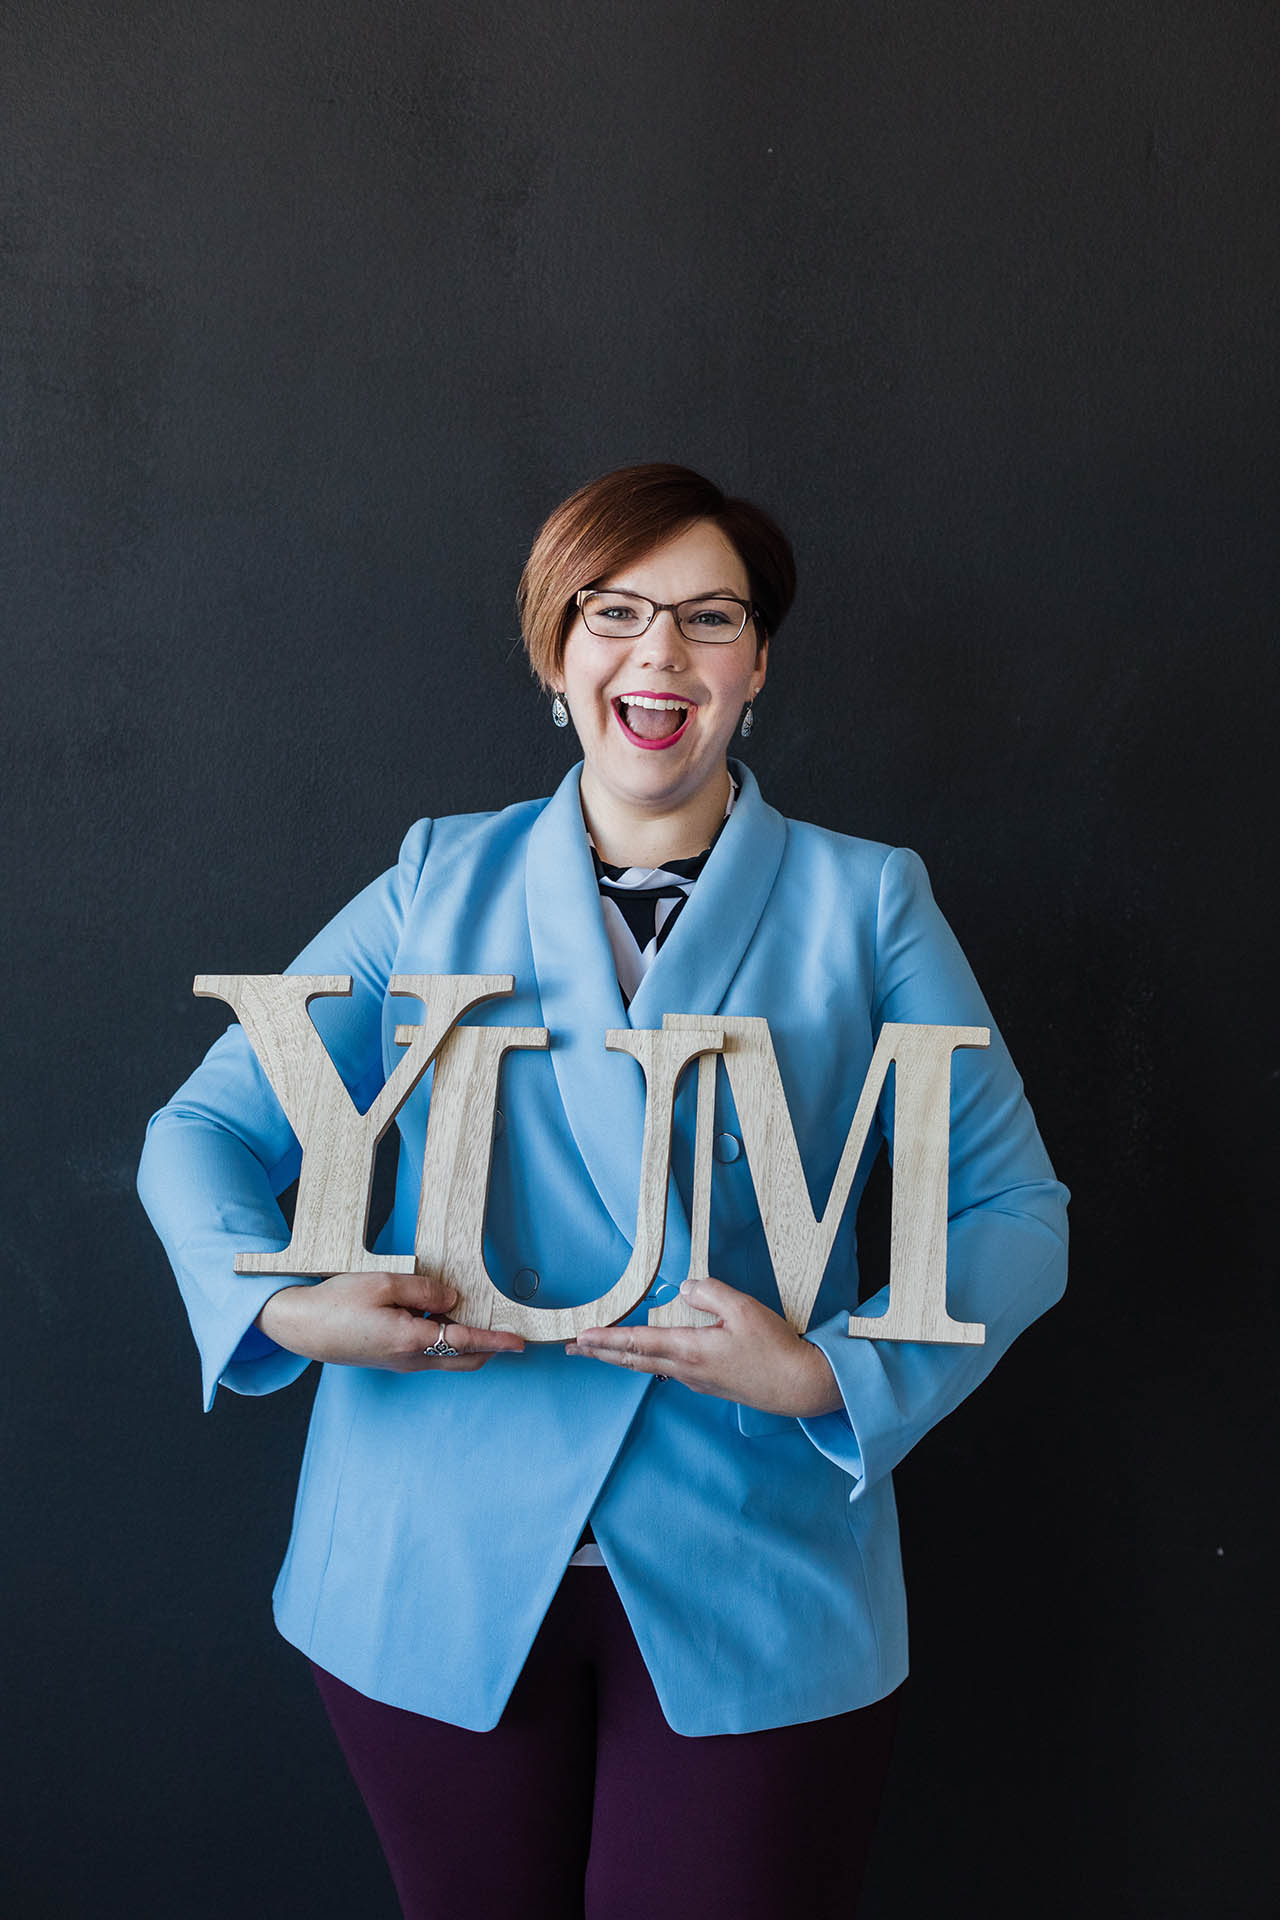 Female corporate headshots; detail shot of a woman's lower face and torso where she's laughing, wearing a blue blazer, and holding a wooden cutout of the word "YUM" in front of a dark background